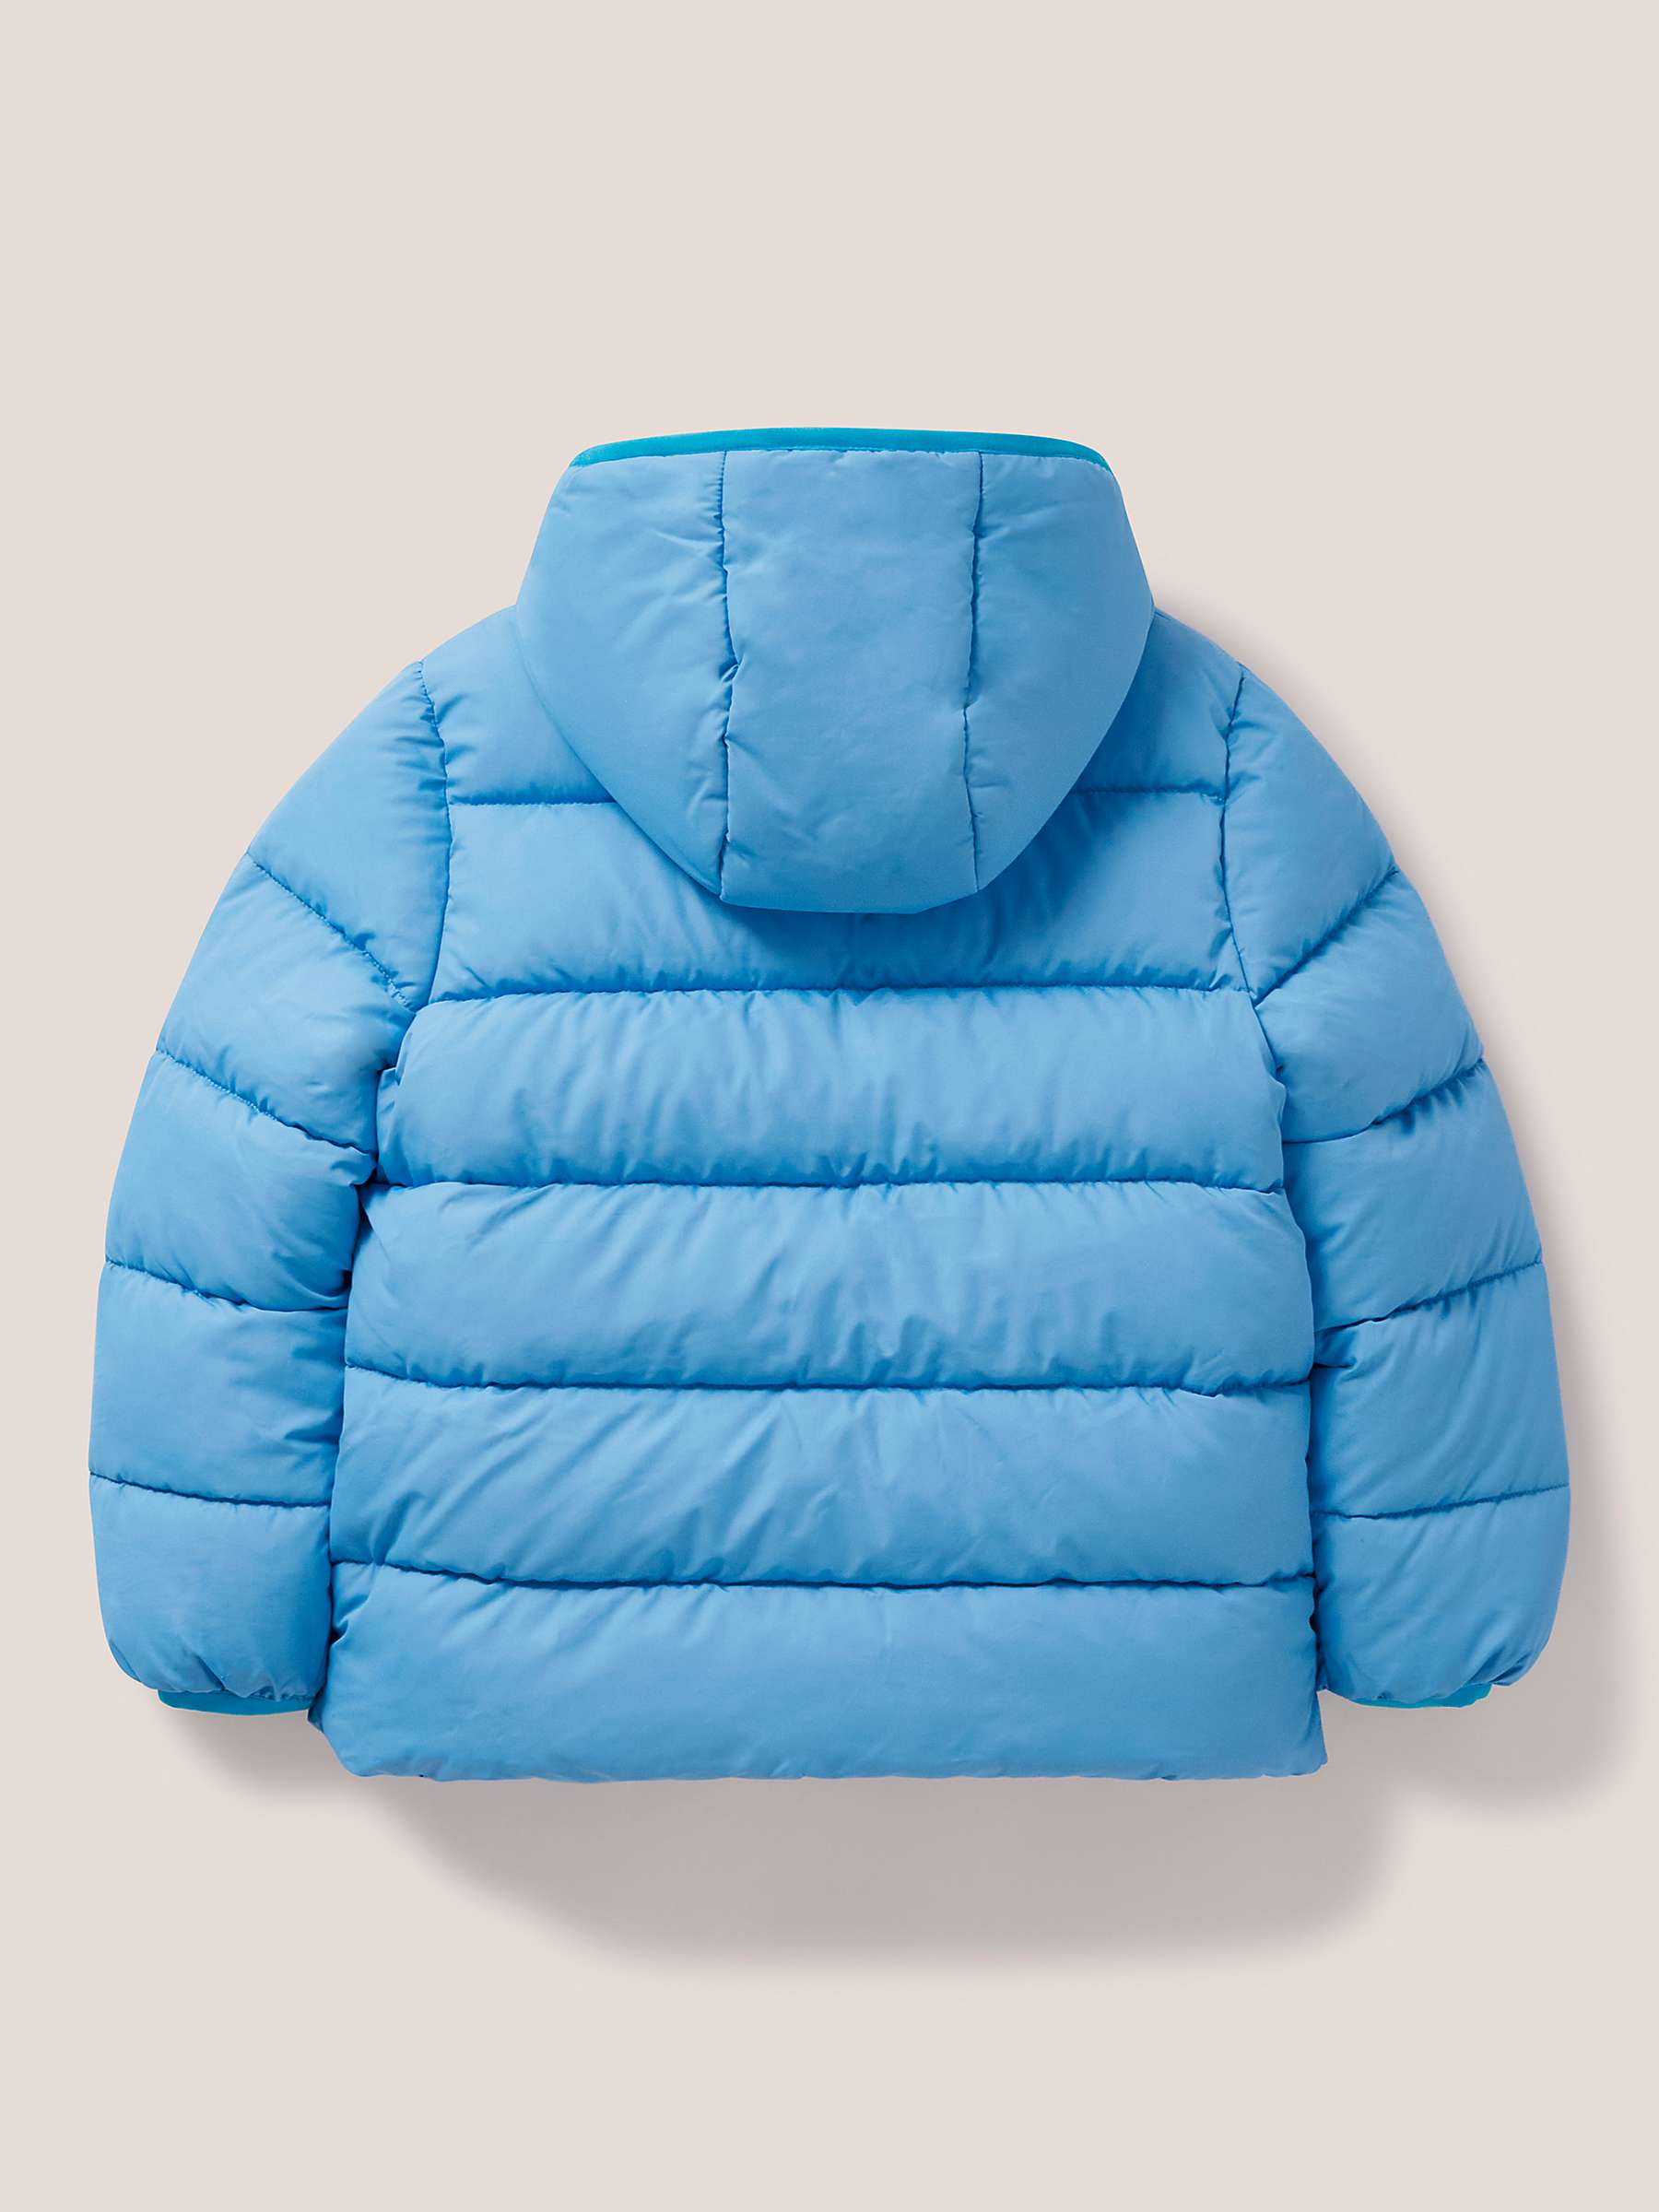 Buy White Stuff Kids' Quilted Puffer Hooded Jacket Online at johnlewis.com